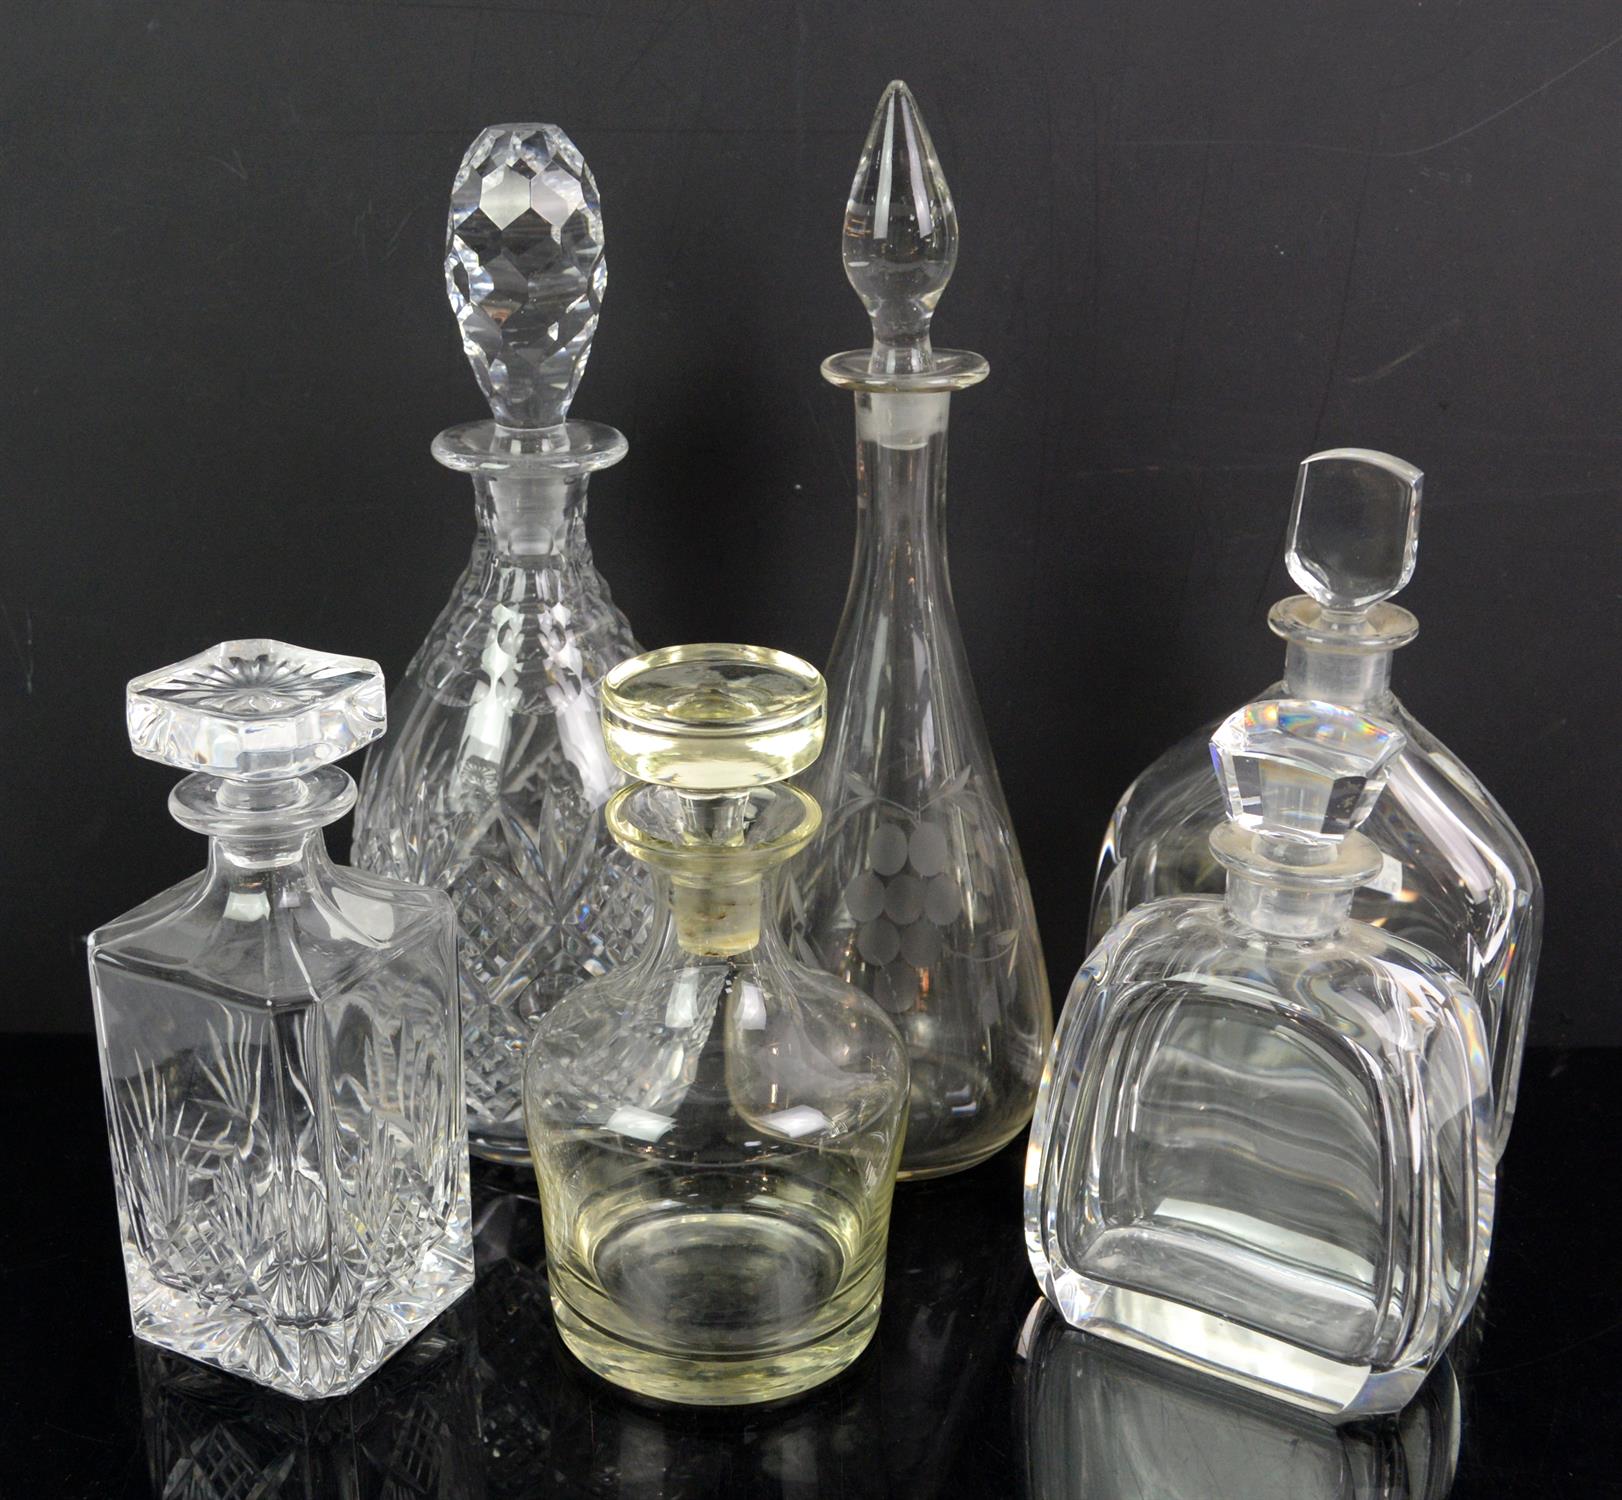 Glassware including cut glass decanters and glasses of various form including tumblers,